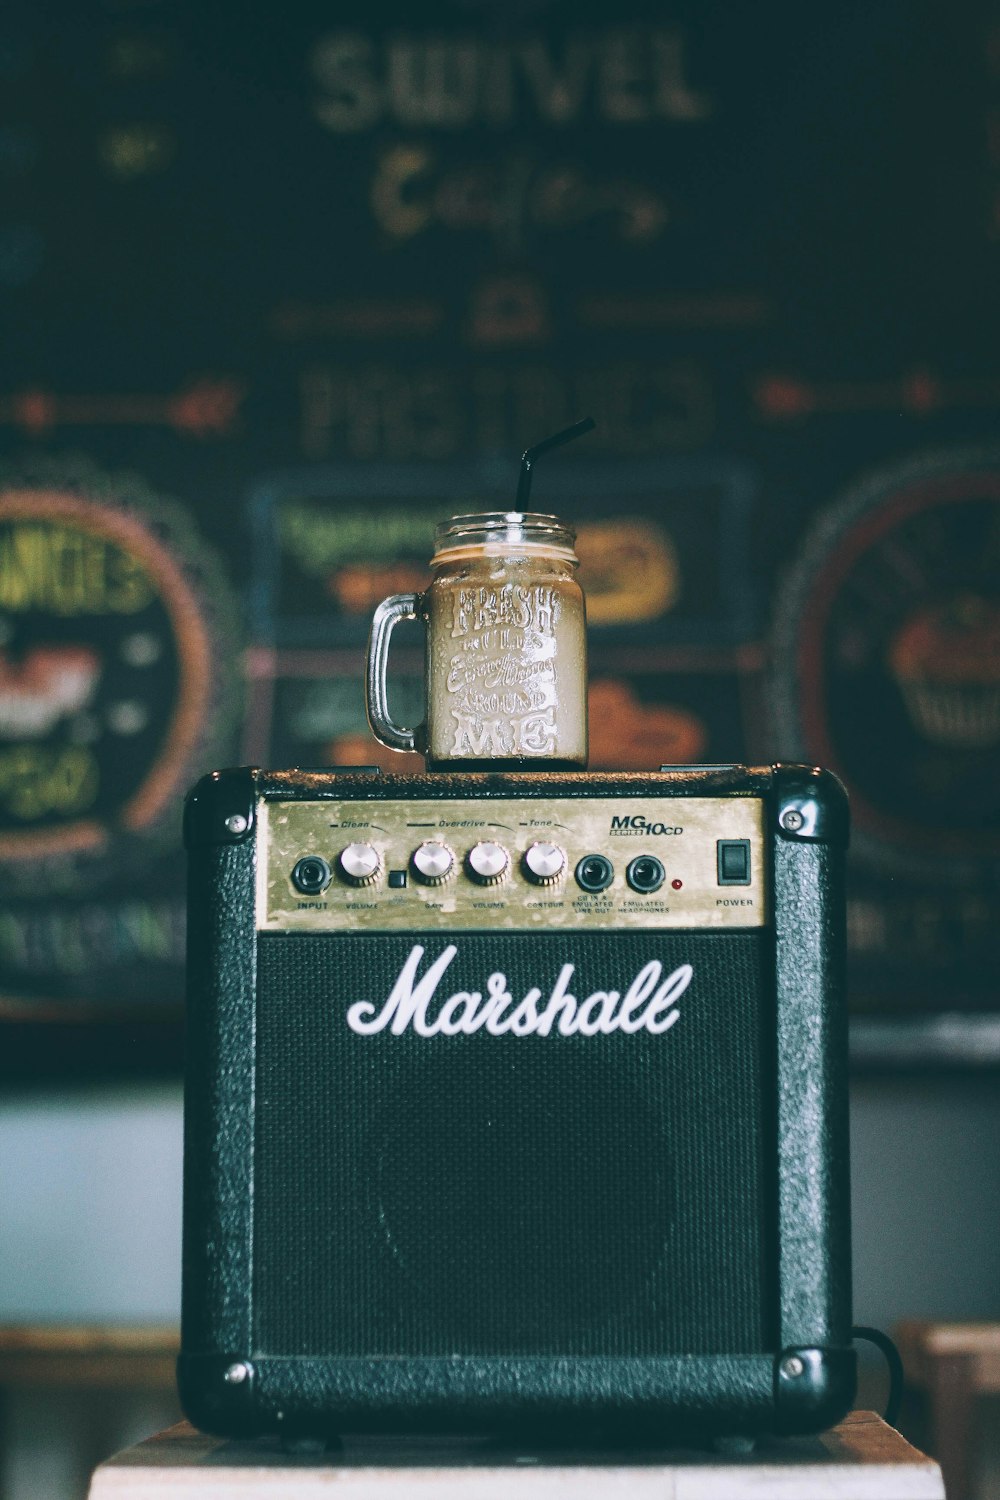 black Marshall guitar amplifier with glass mug on top filled with beverage